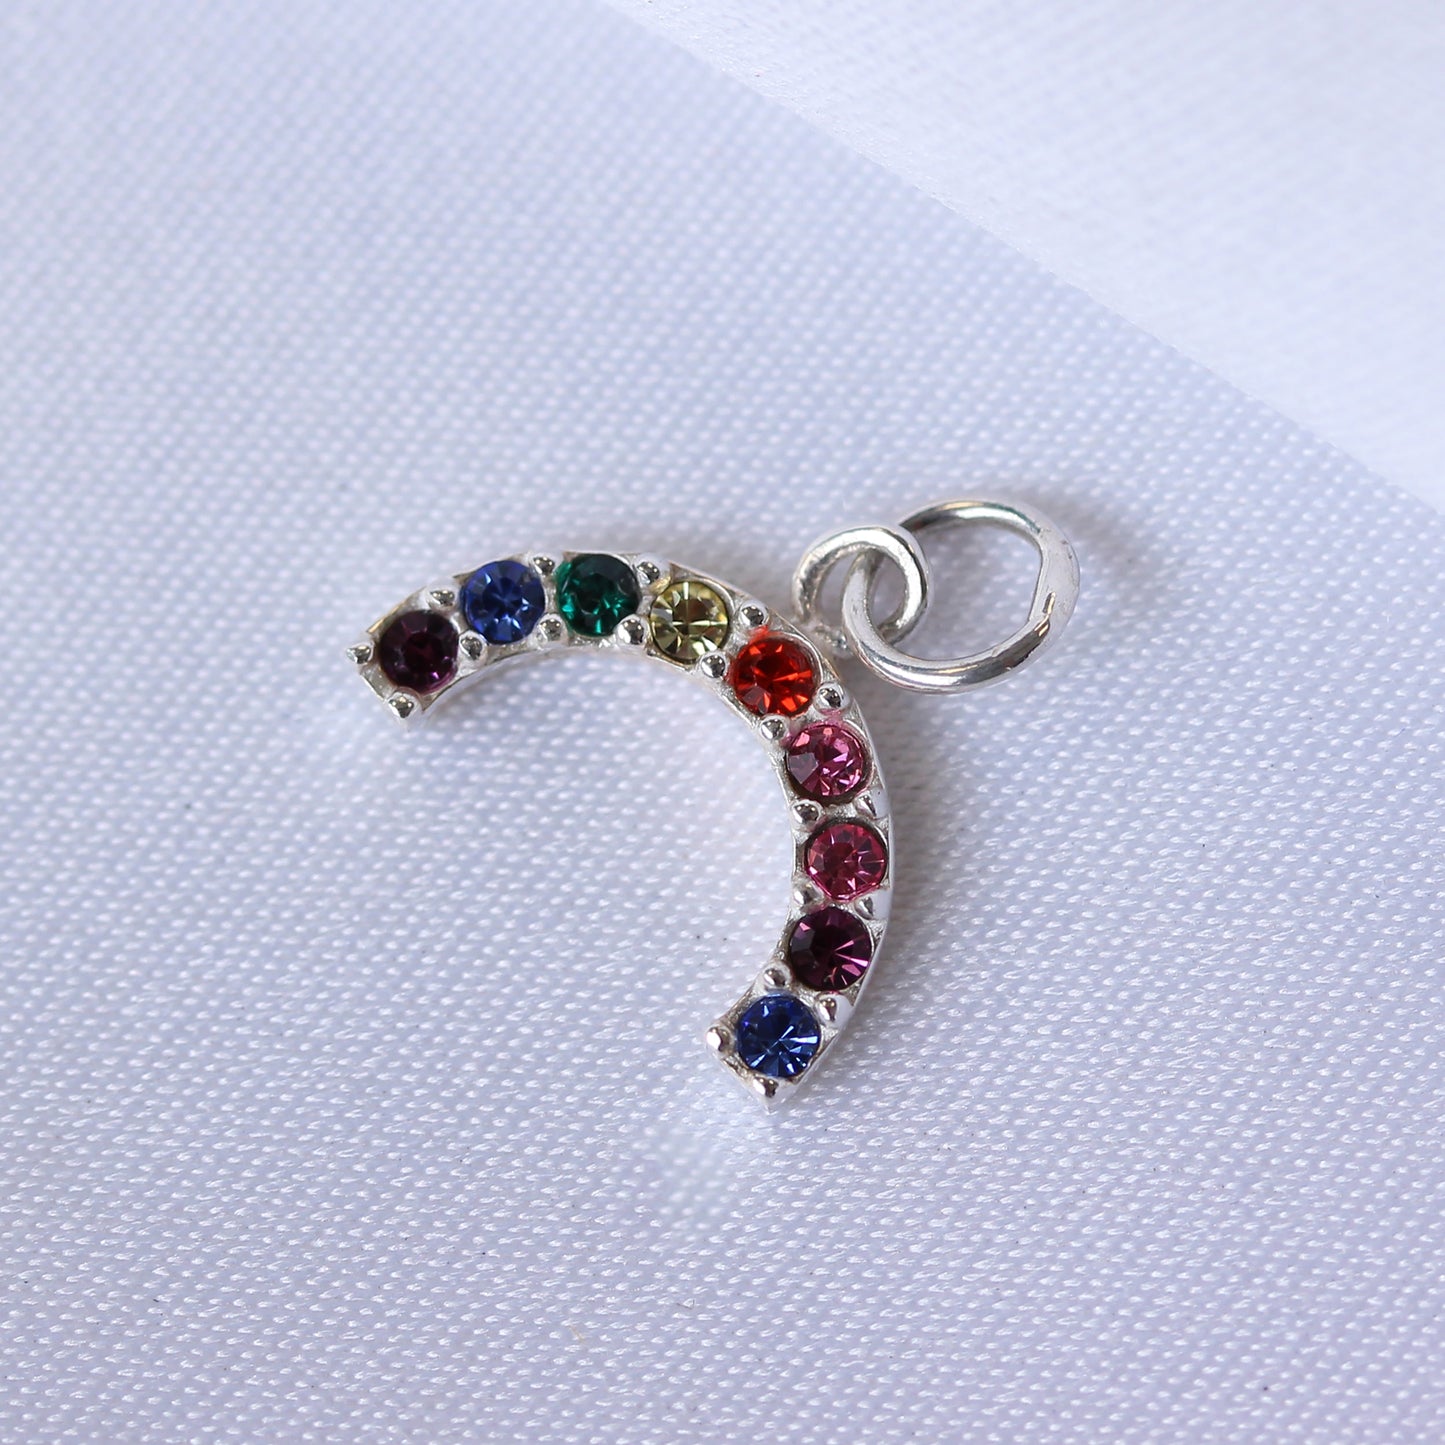 Sterling Silver Multi-Coloured CZ Rainbow Charm